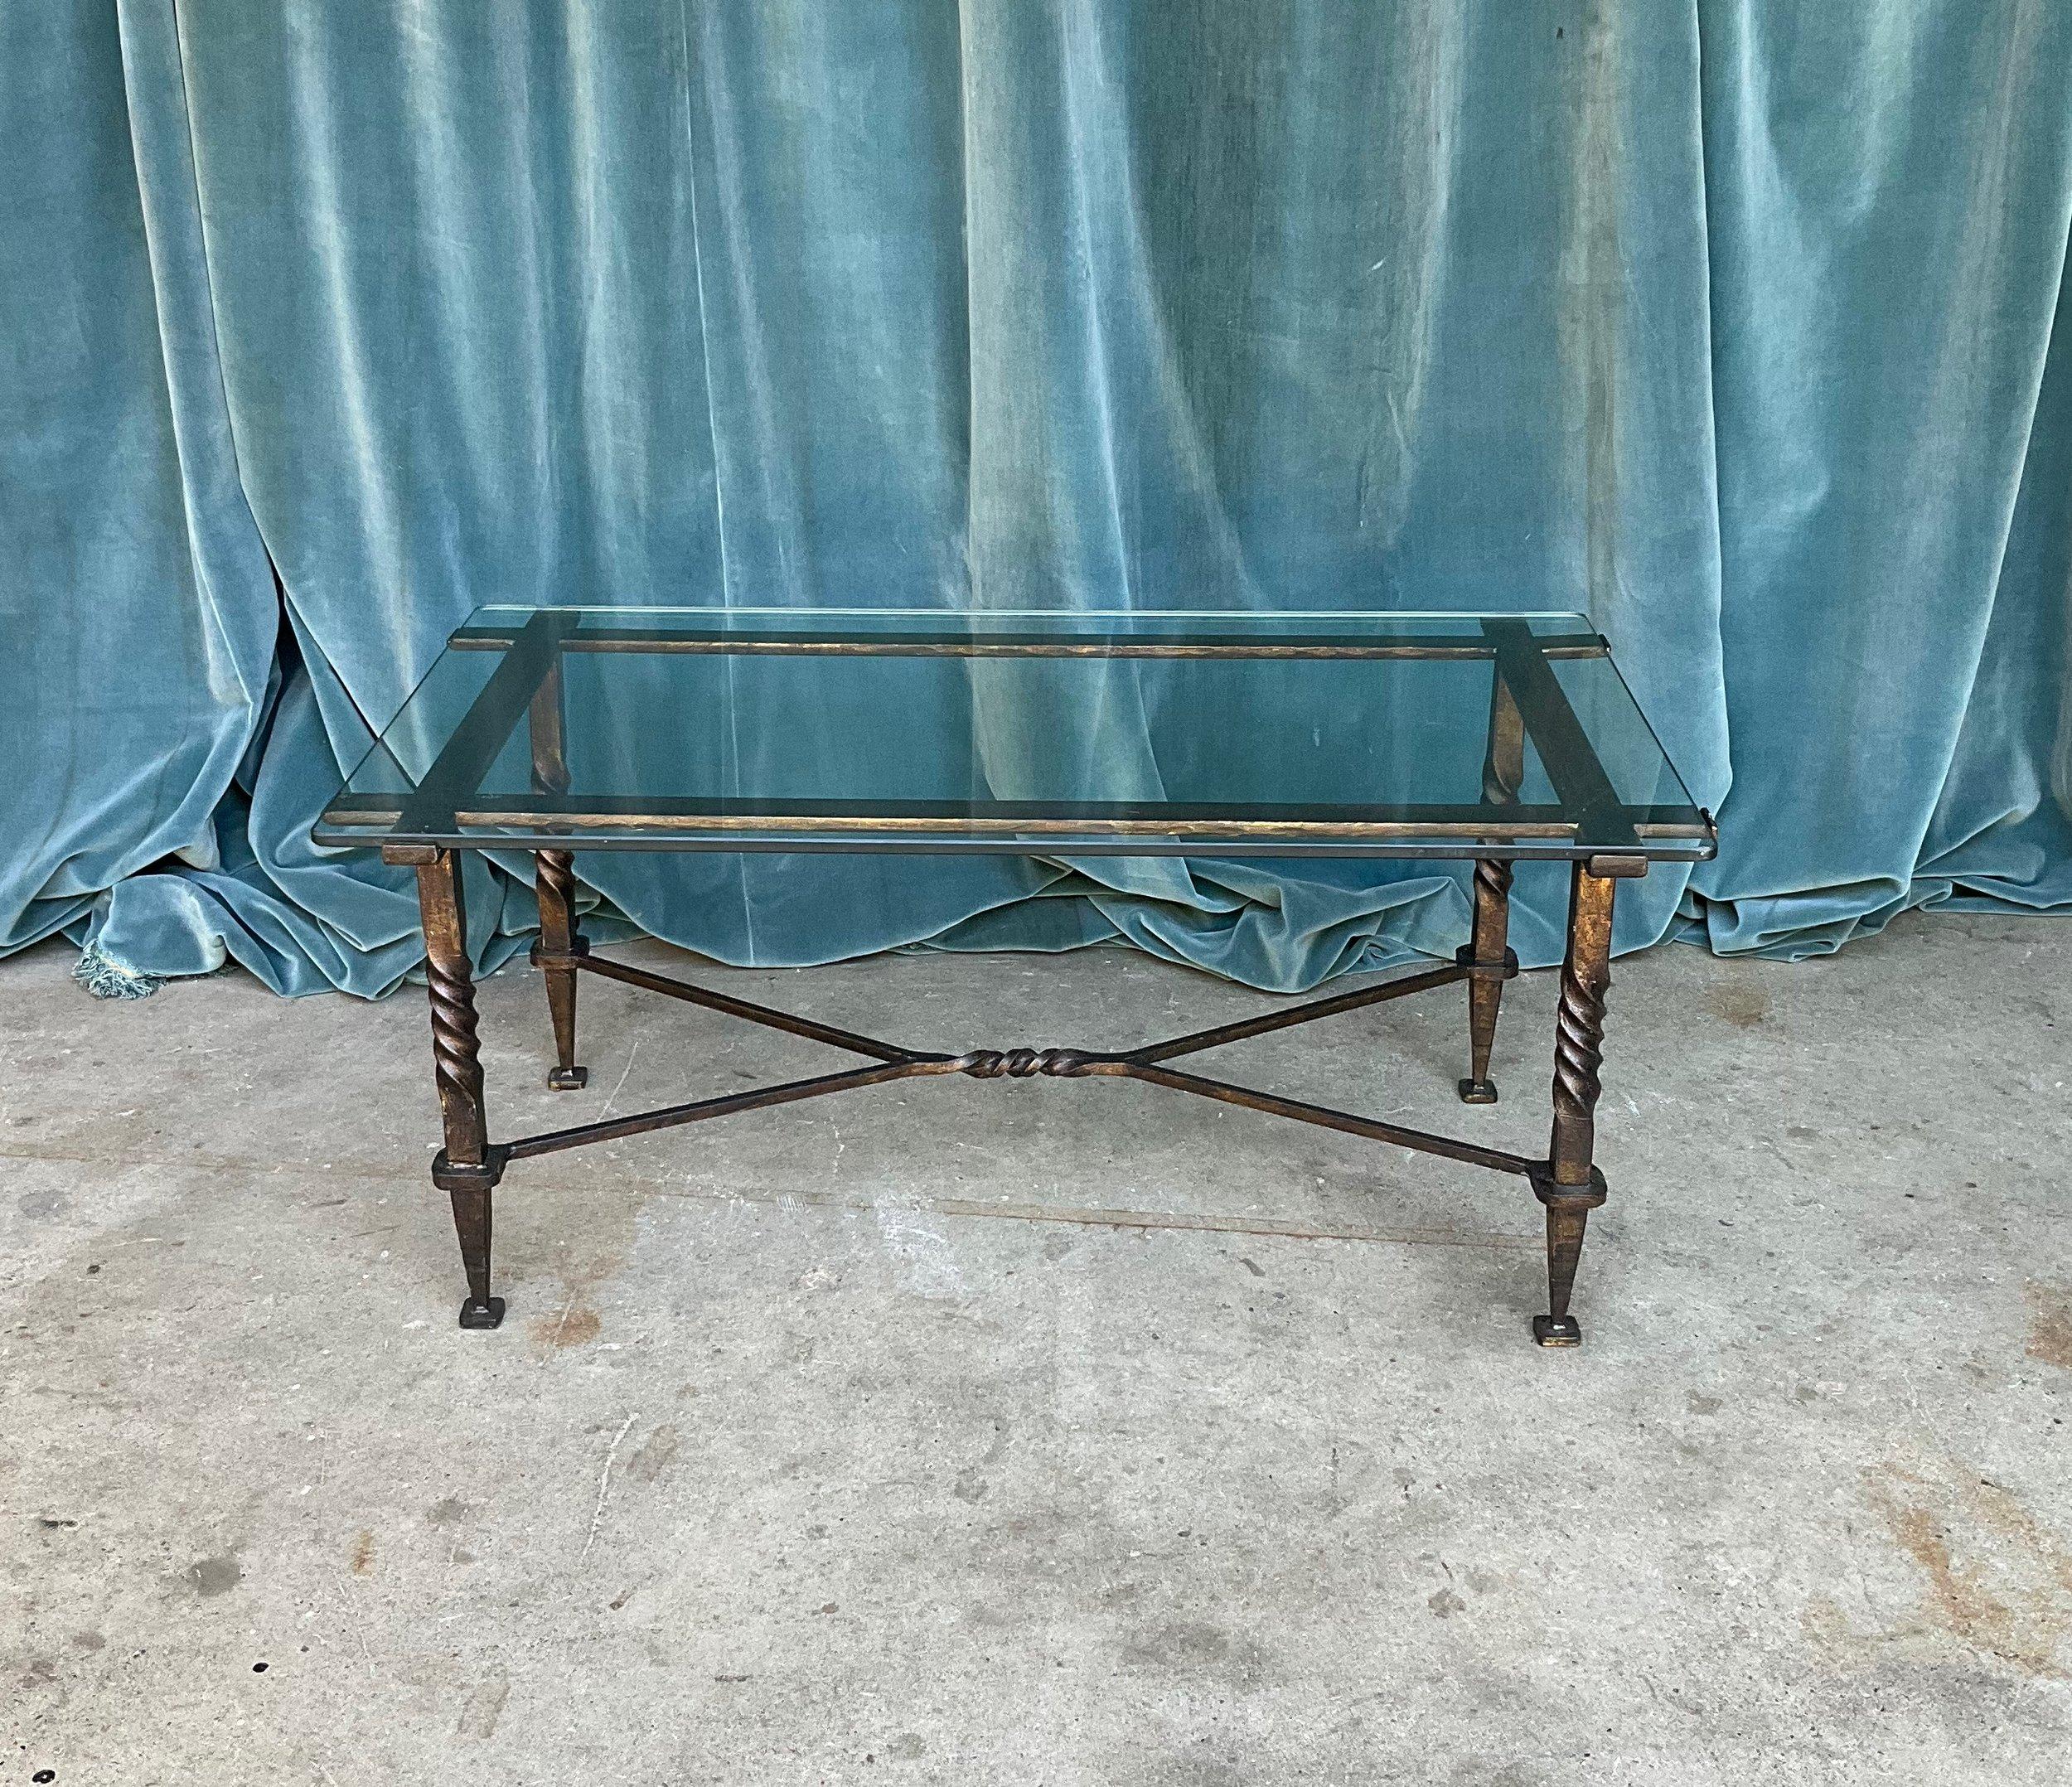 Mid-20th Century French Modernist Coffee Table with Twisted Iron Base For Sale